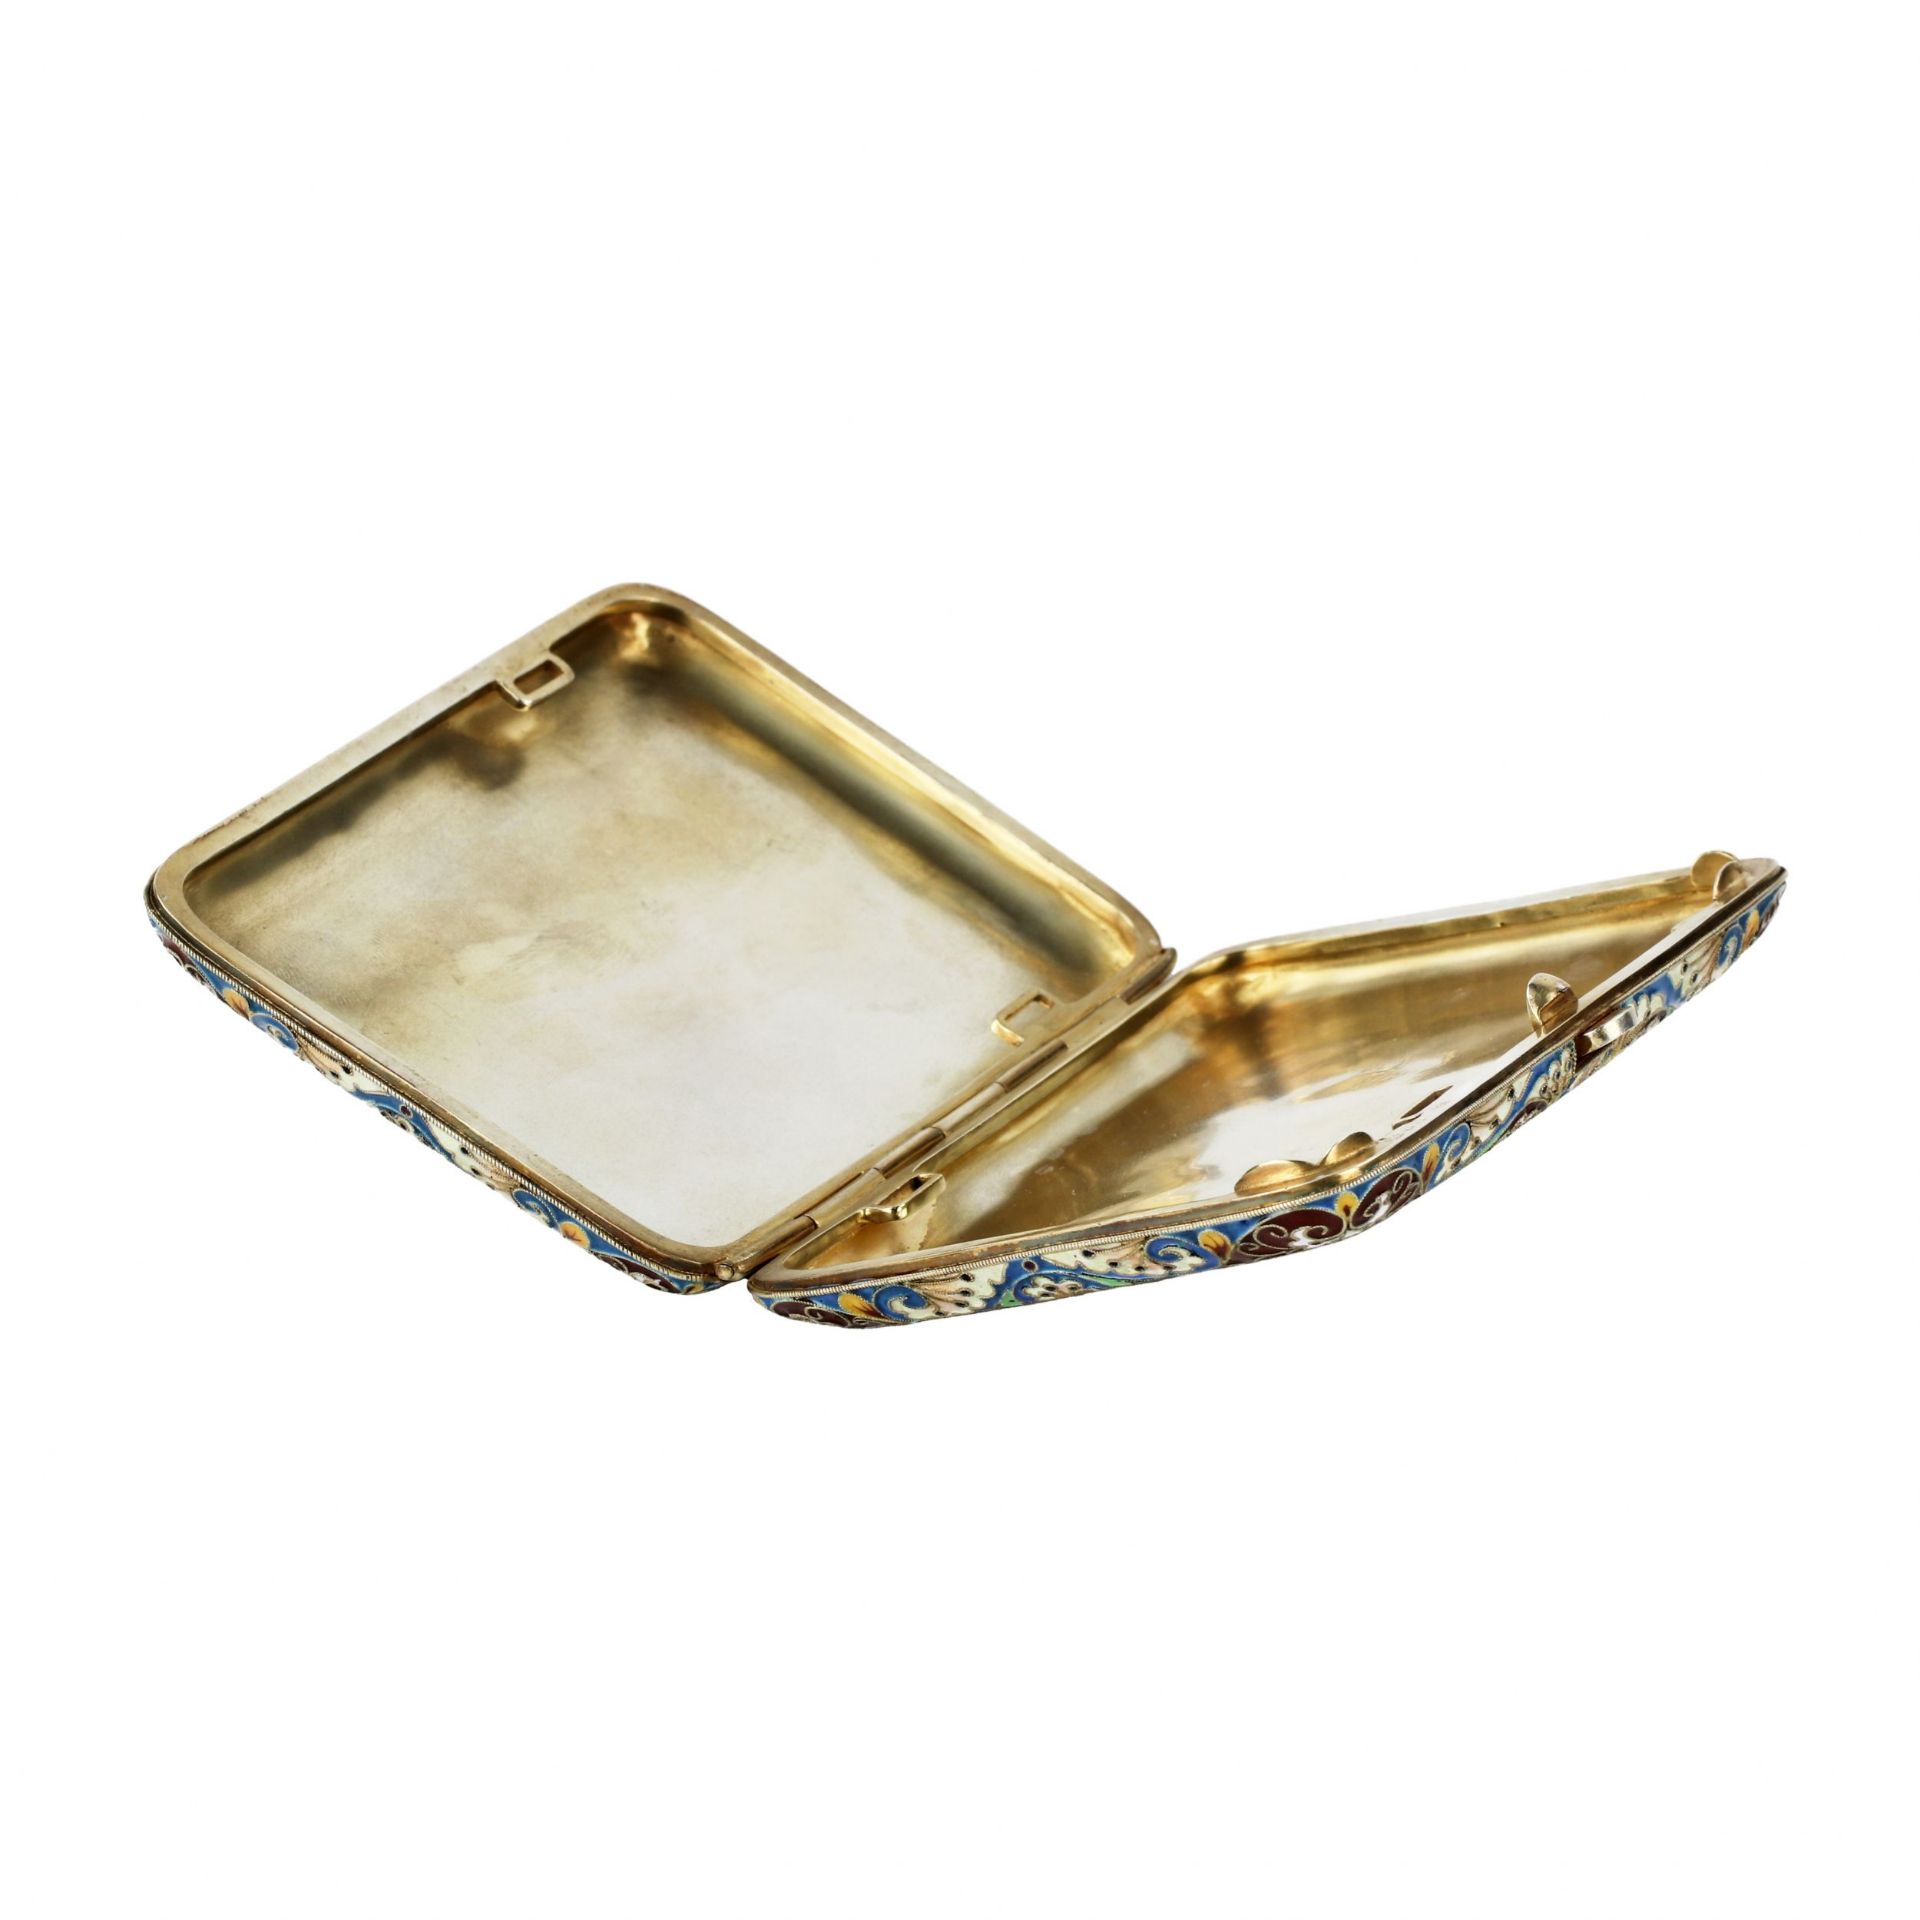 Silver cigarette case with gilding and cloisonne enamel. - Image 5 of 8